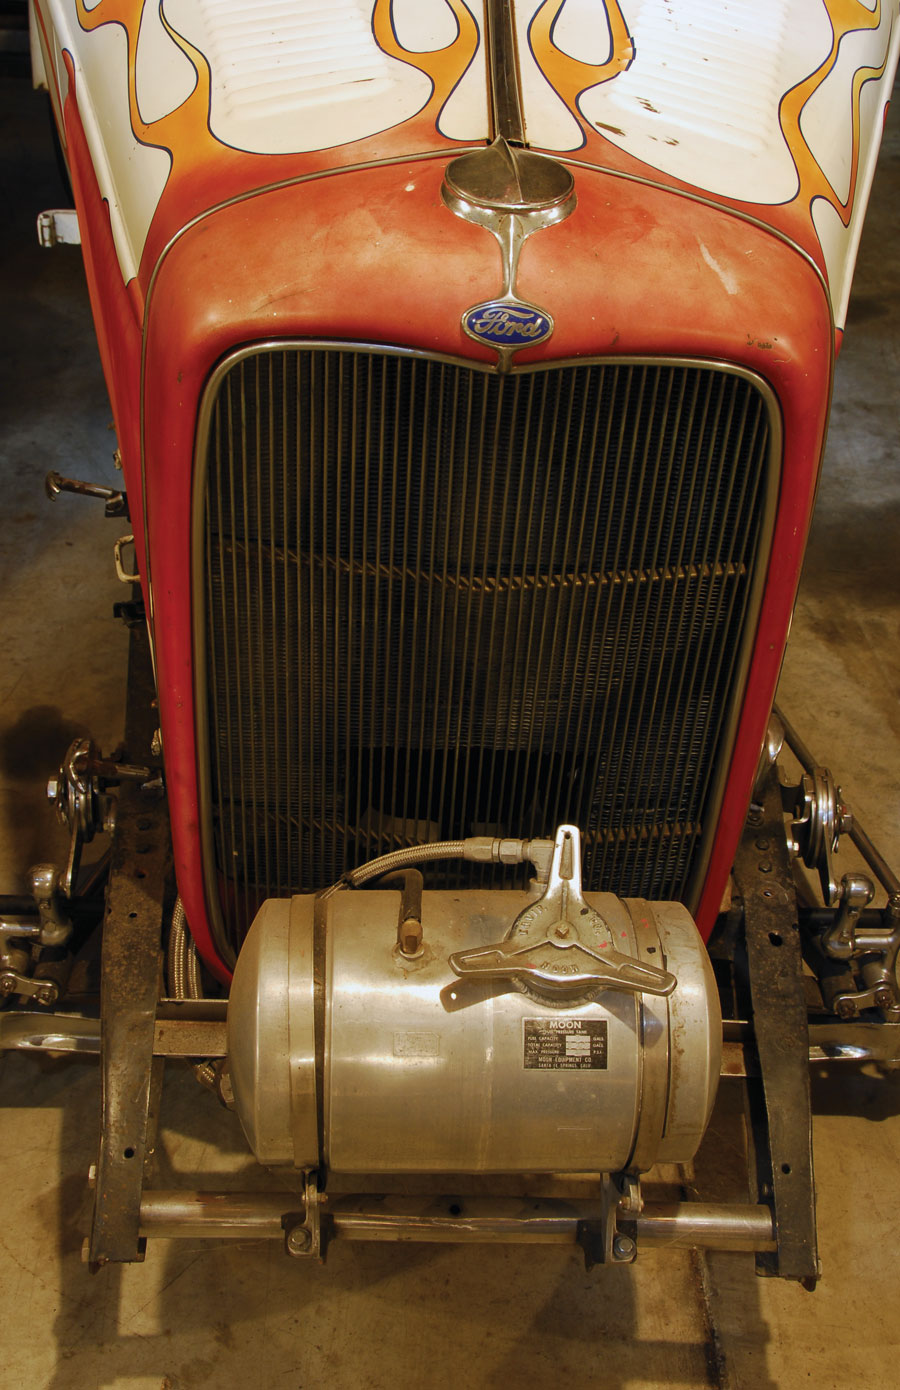 Here’s a closeup from the front of the ex-Jim Lattin Deuce roadster